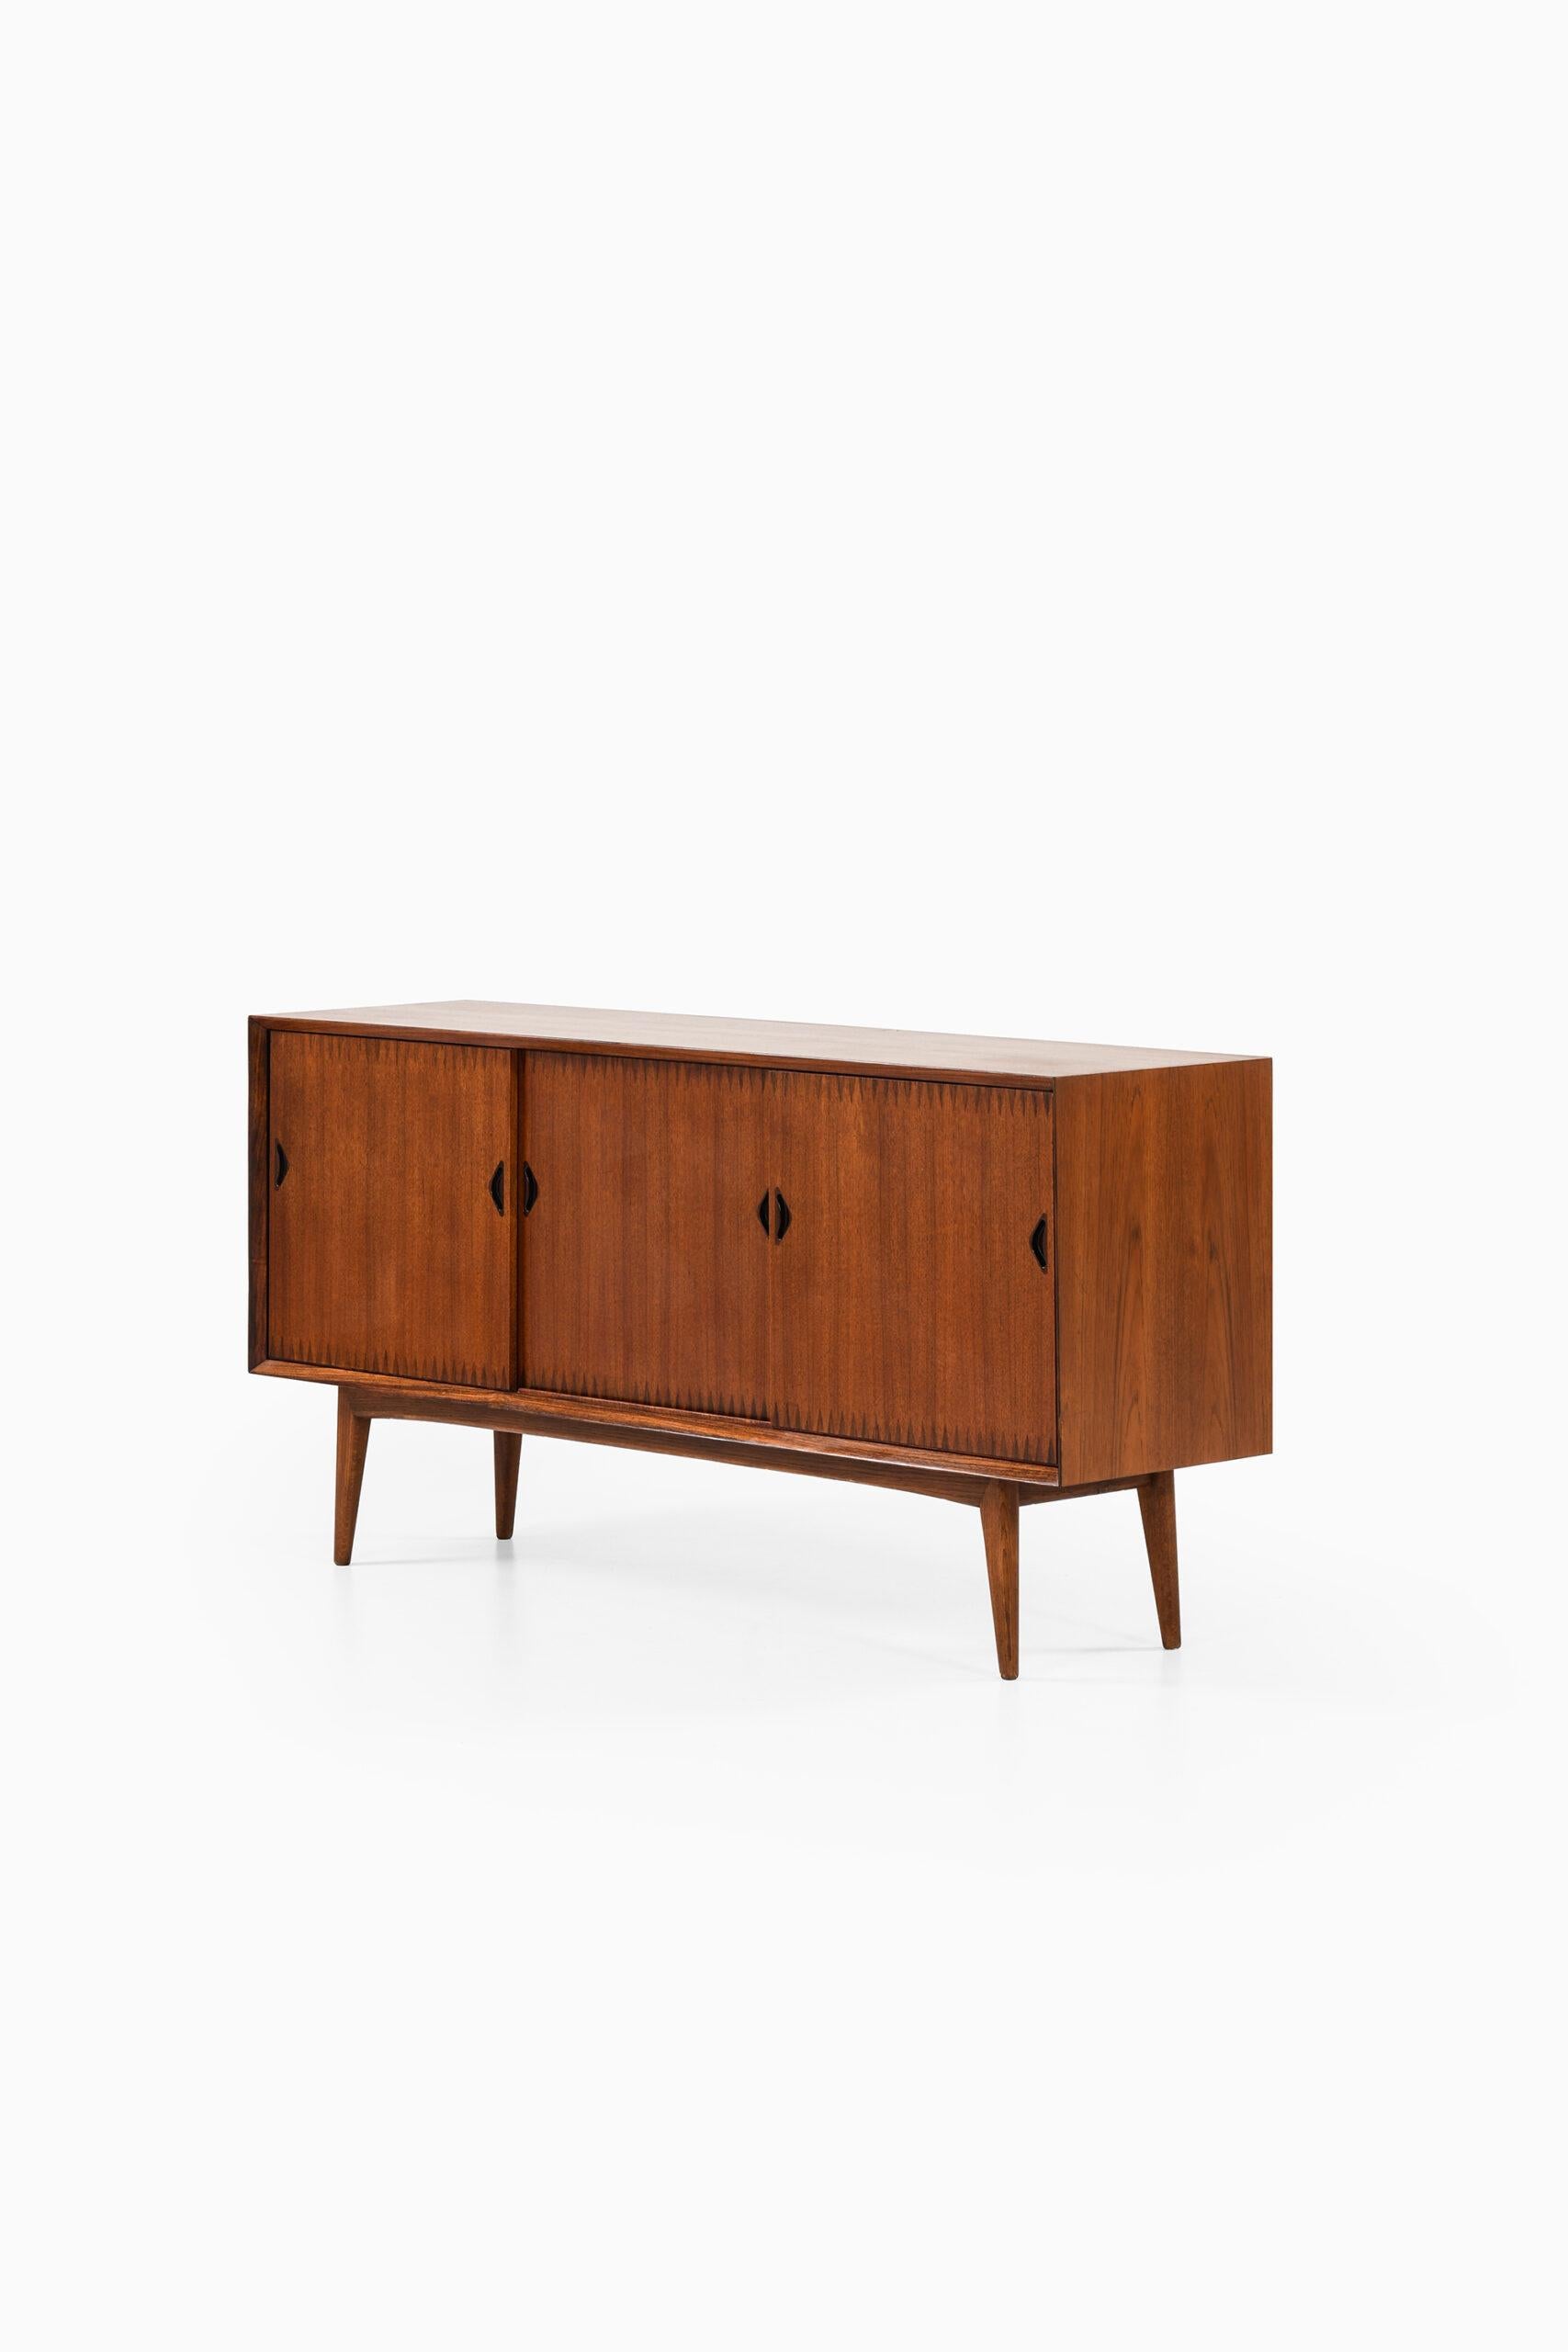 Mid-20th Century Sideboard Probably Produced in Sweden